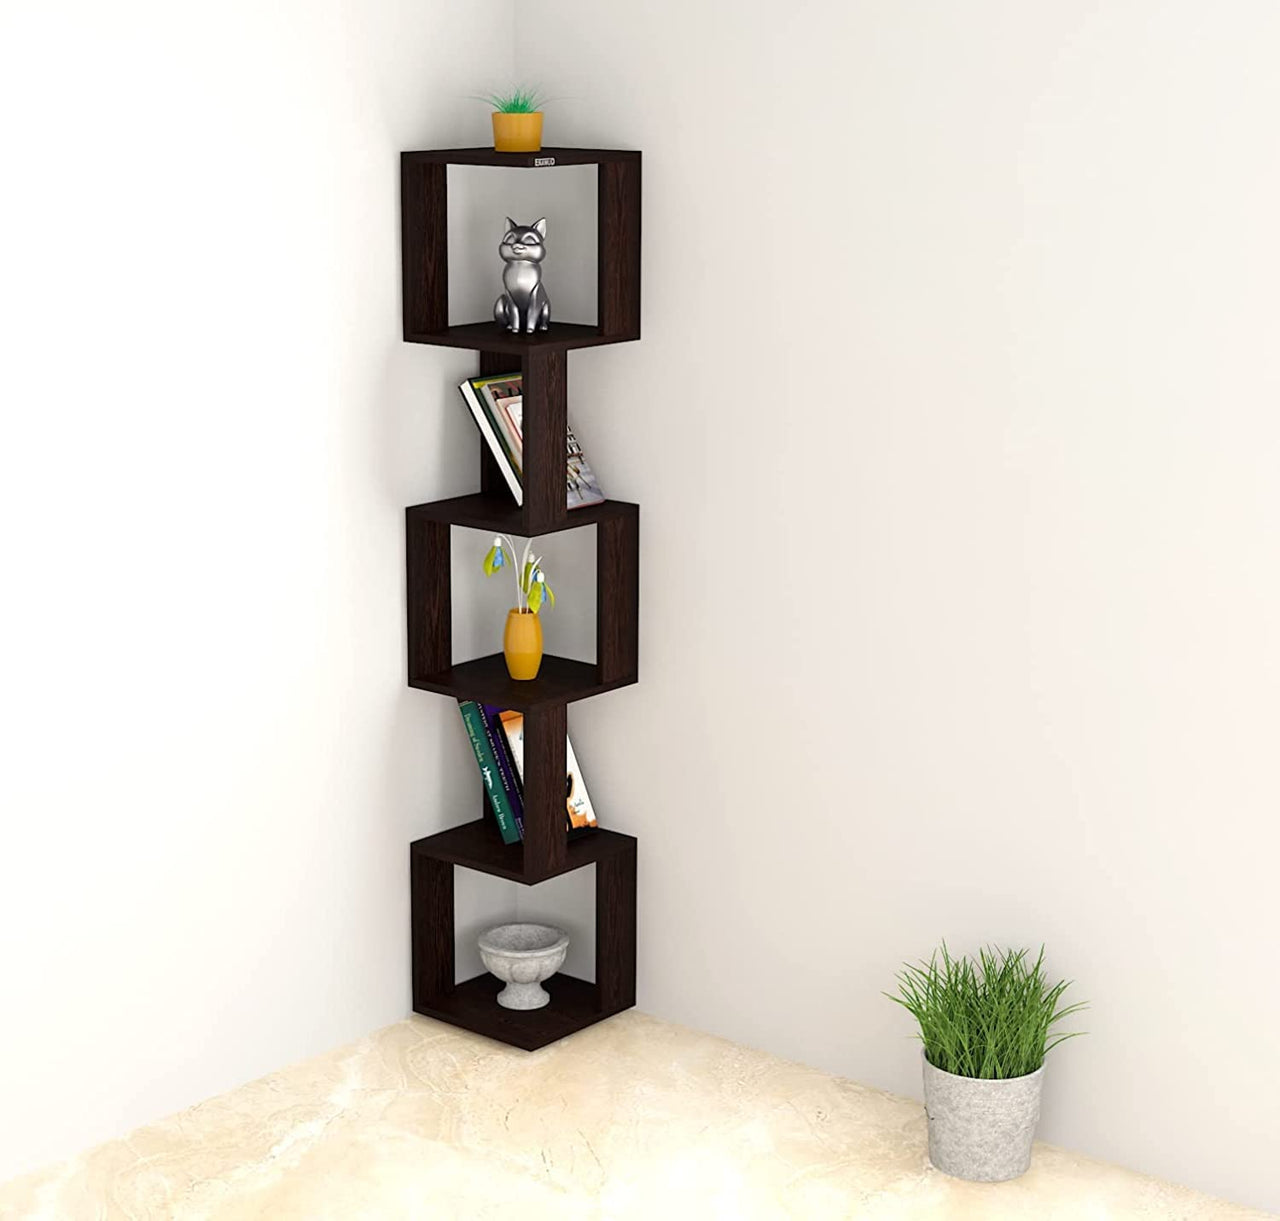 Wooden Wall Shelves | Wall Corner Shelf for Living Room Stylish | Home Décor Floating Display Rack Storage Organizer Unique Design Dime Store